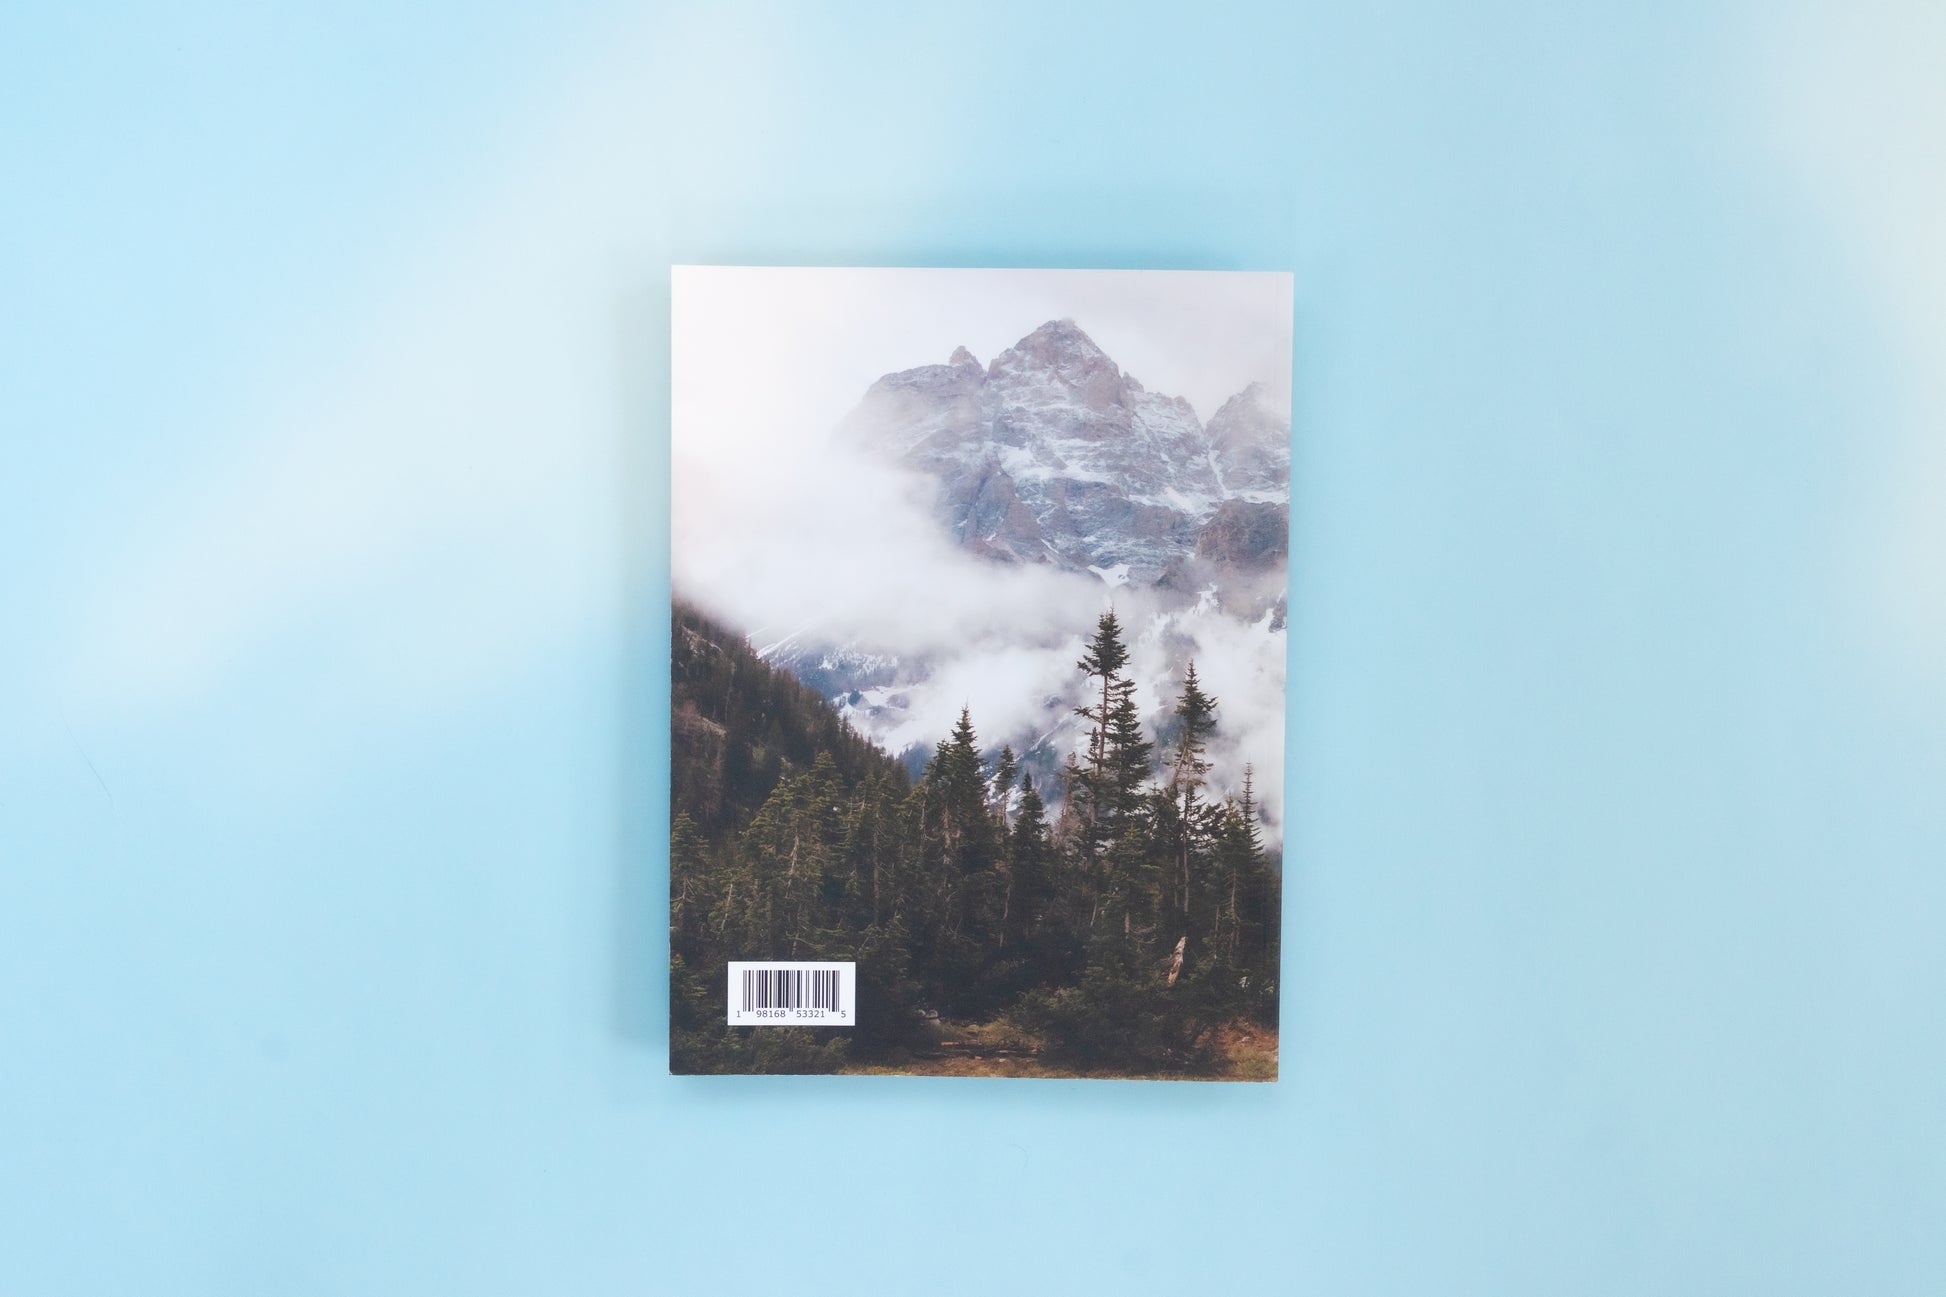 The back of a magazine is over a blue background. The image is a cold and foggy mountain scene with peaks peering out of the fog and pine trees in the foreground.